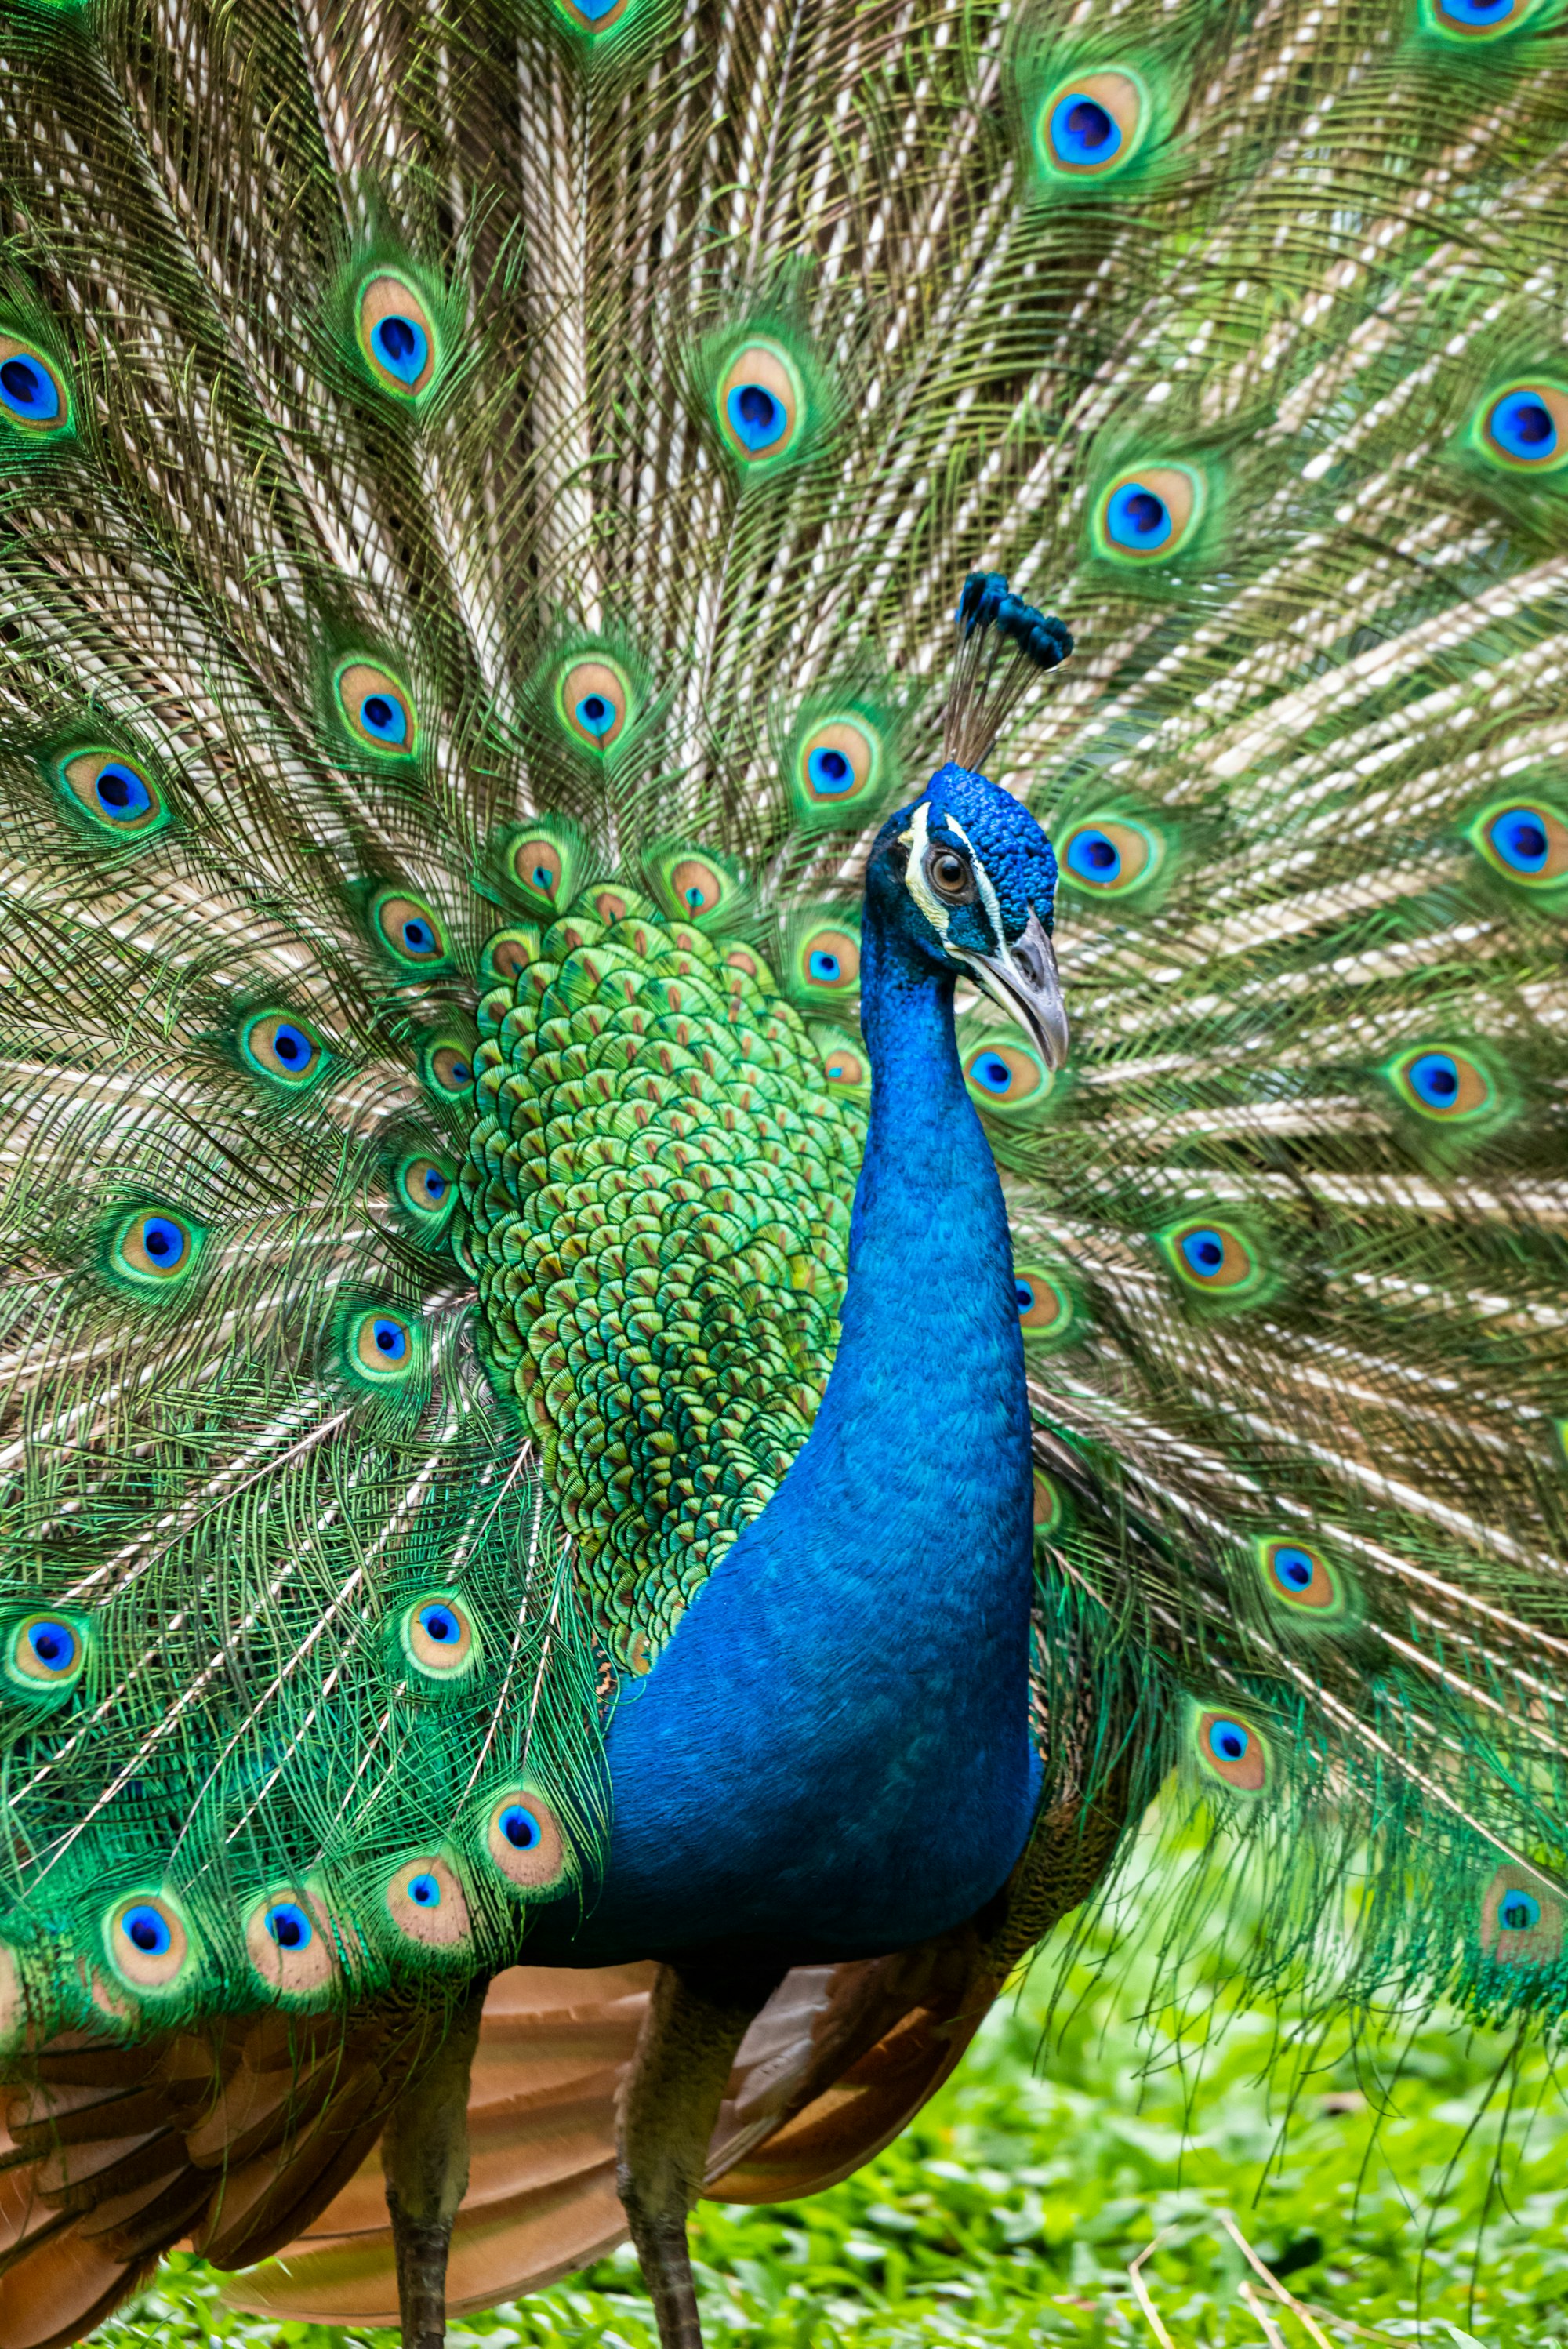 Man charged with stealing 'peacock feathers'